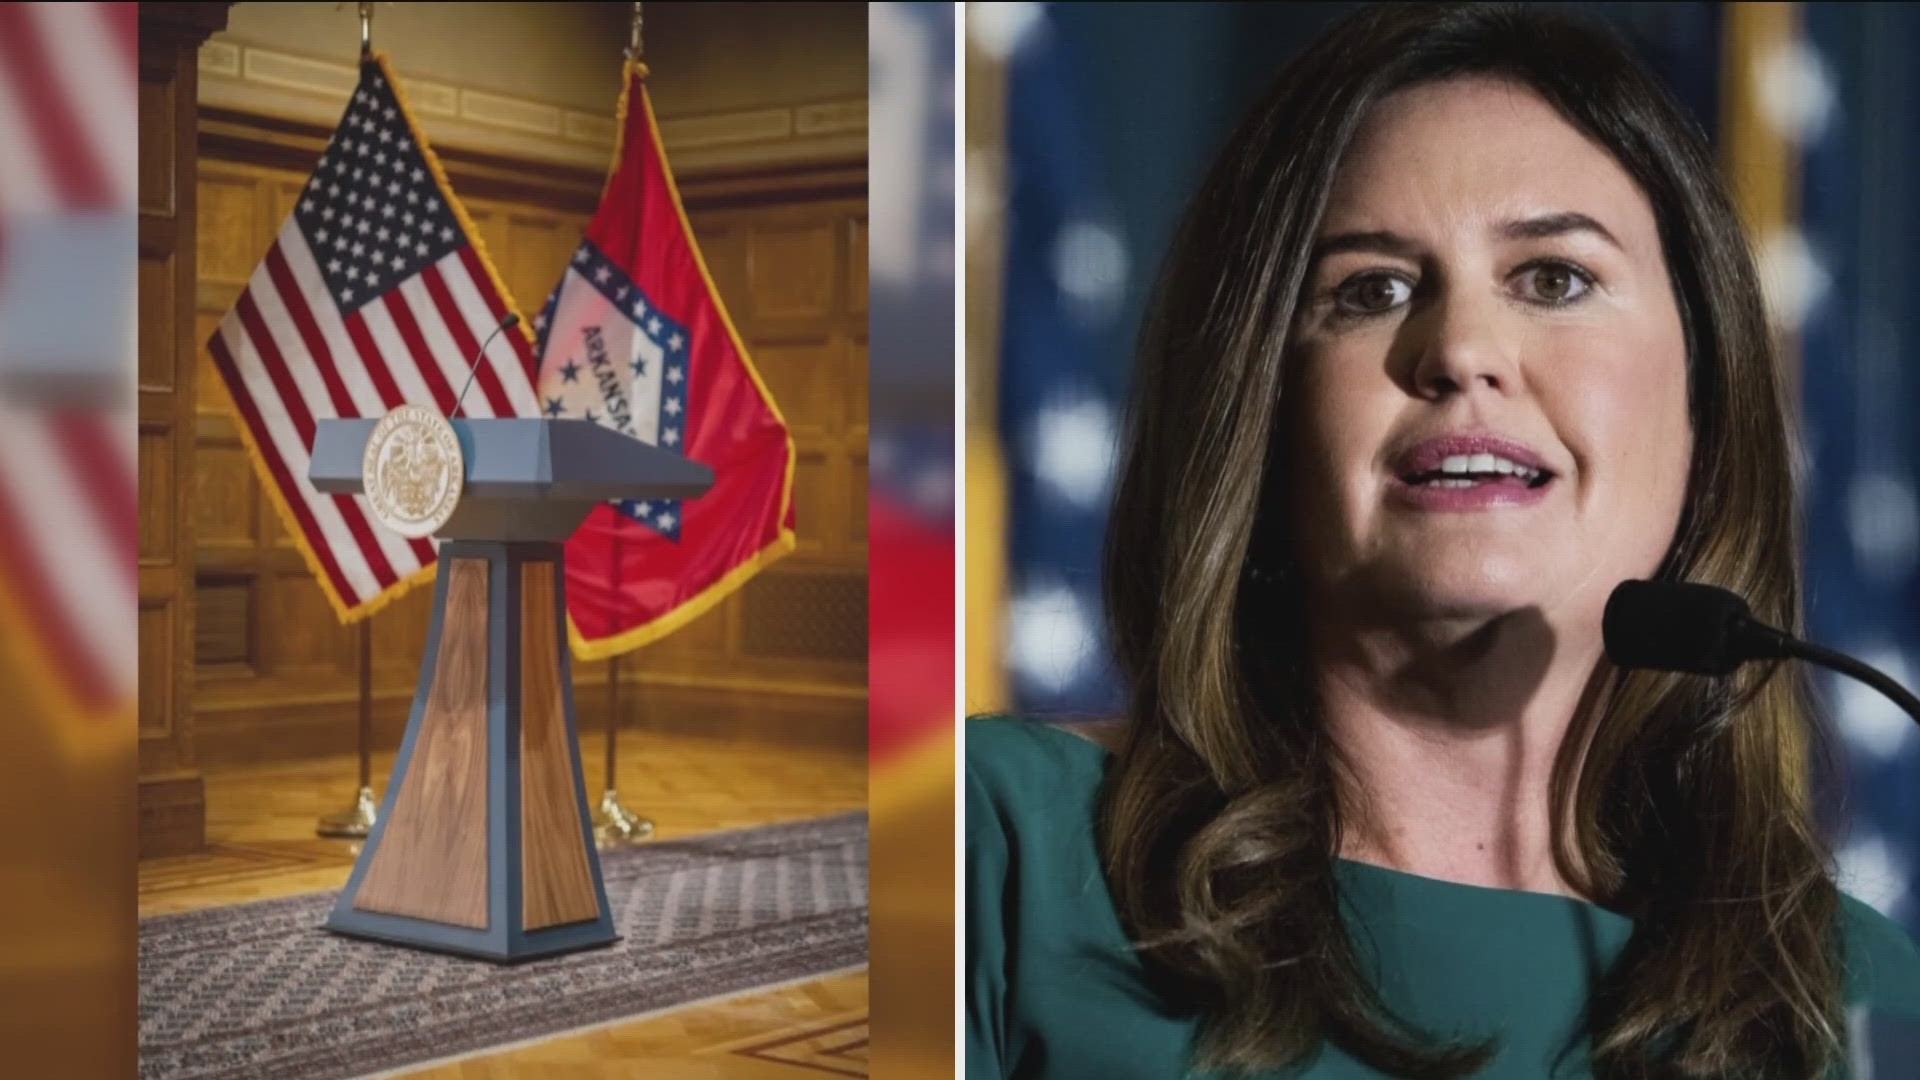 Records show Arkansas Governor Sarah Huckabee Sanders purchased a $19,000 lectern. An audit is underway. Here's how that's going.